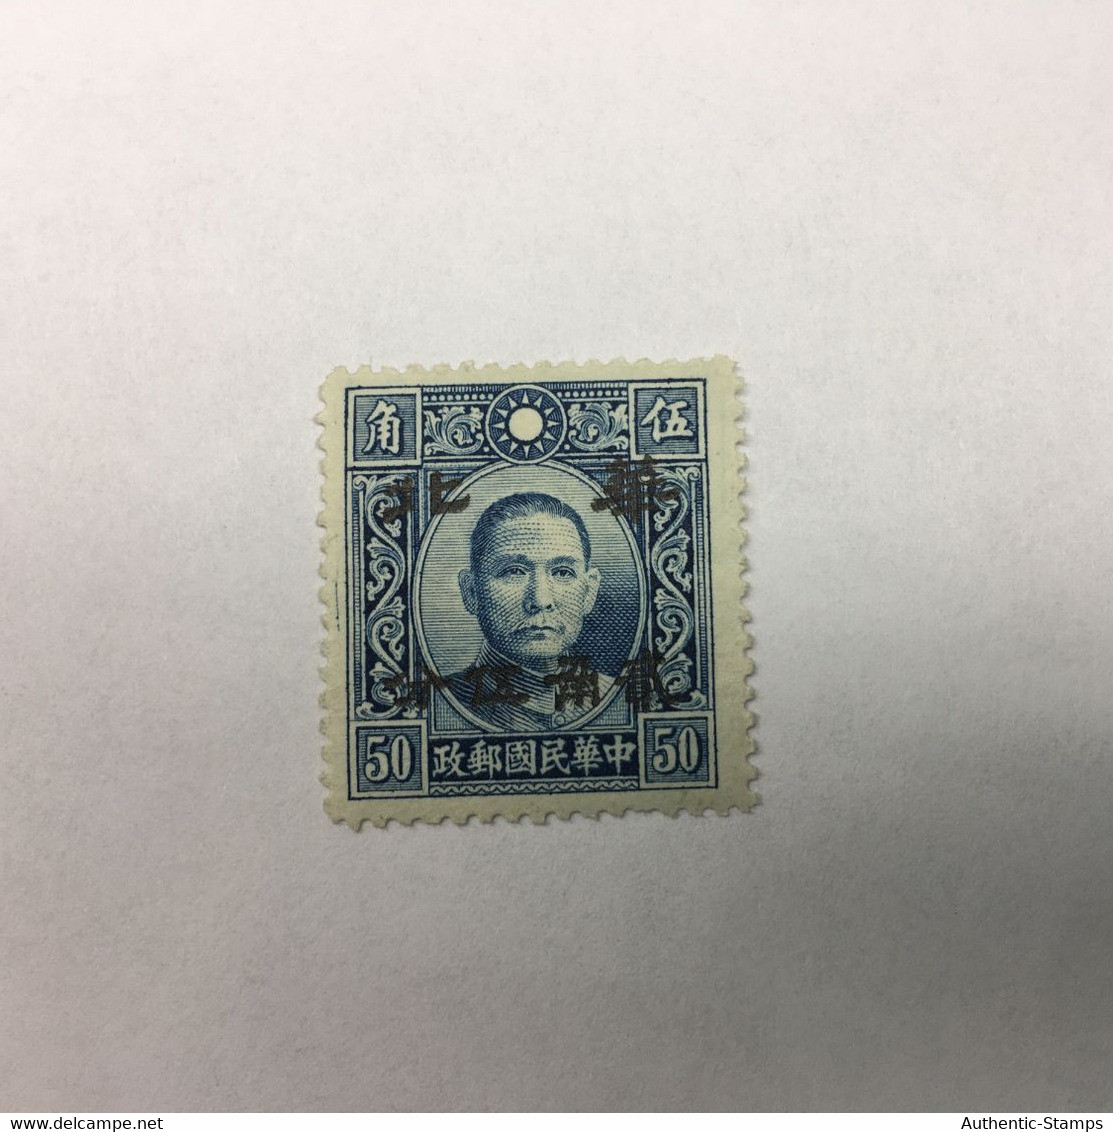 CHINA STAMP, USED, TIMBRO, STEMPEL, CINA, CHINE, LIST 5805 - 1941-45 Cina Del Nord